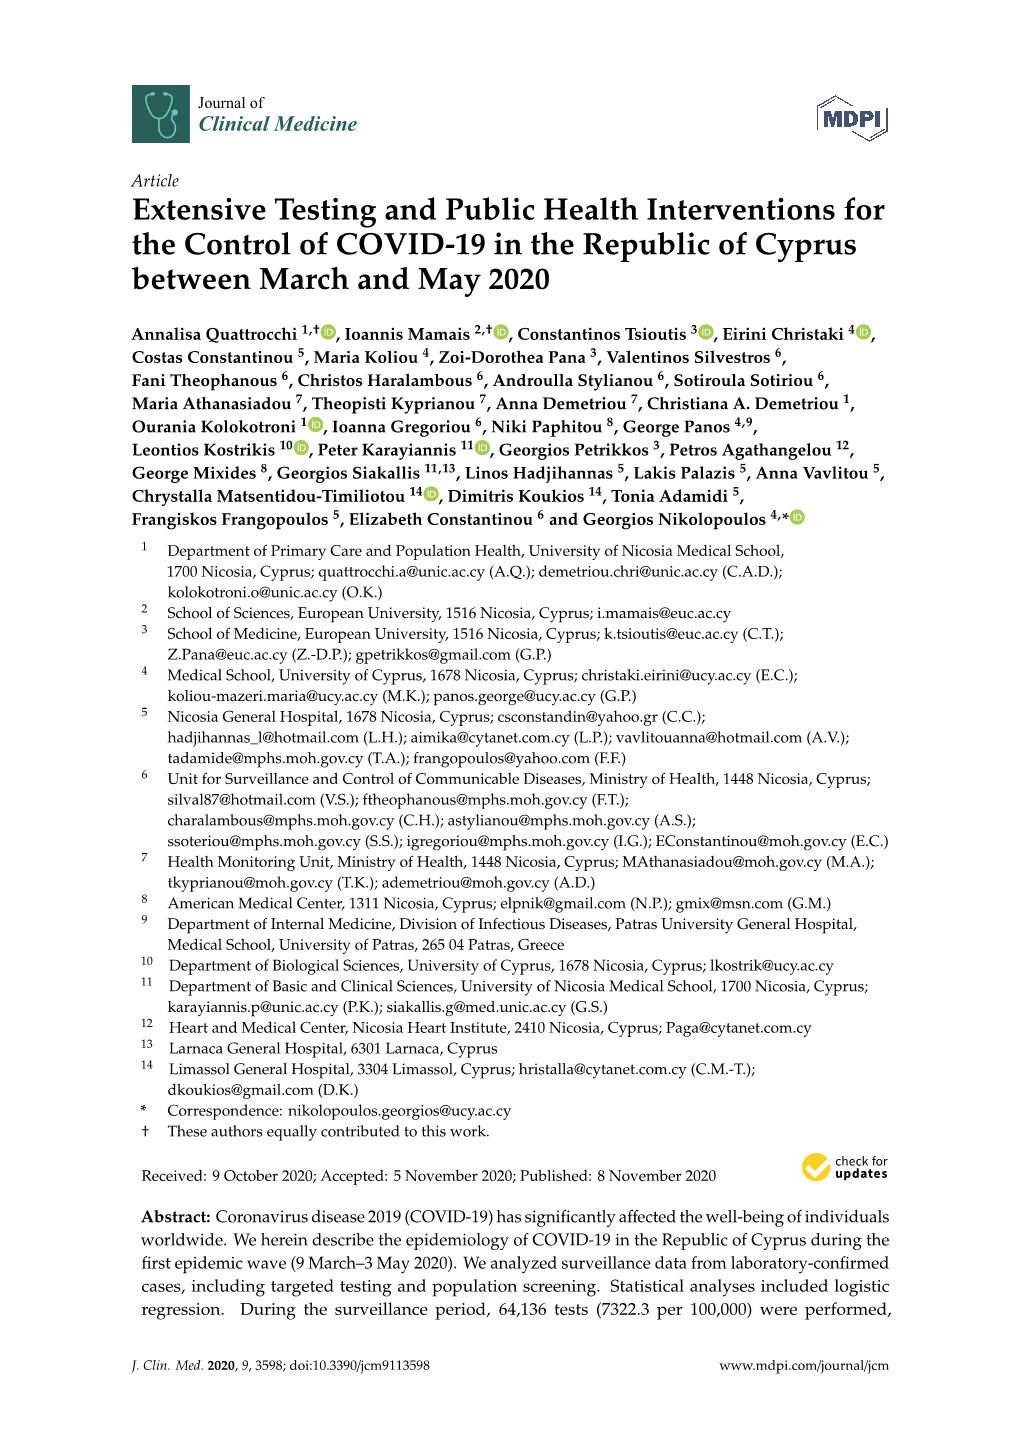 Extensive Testing and Public Health Interventions for the Control of COVID-19 in the Republic of Cyprus Between March and May 2020